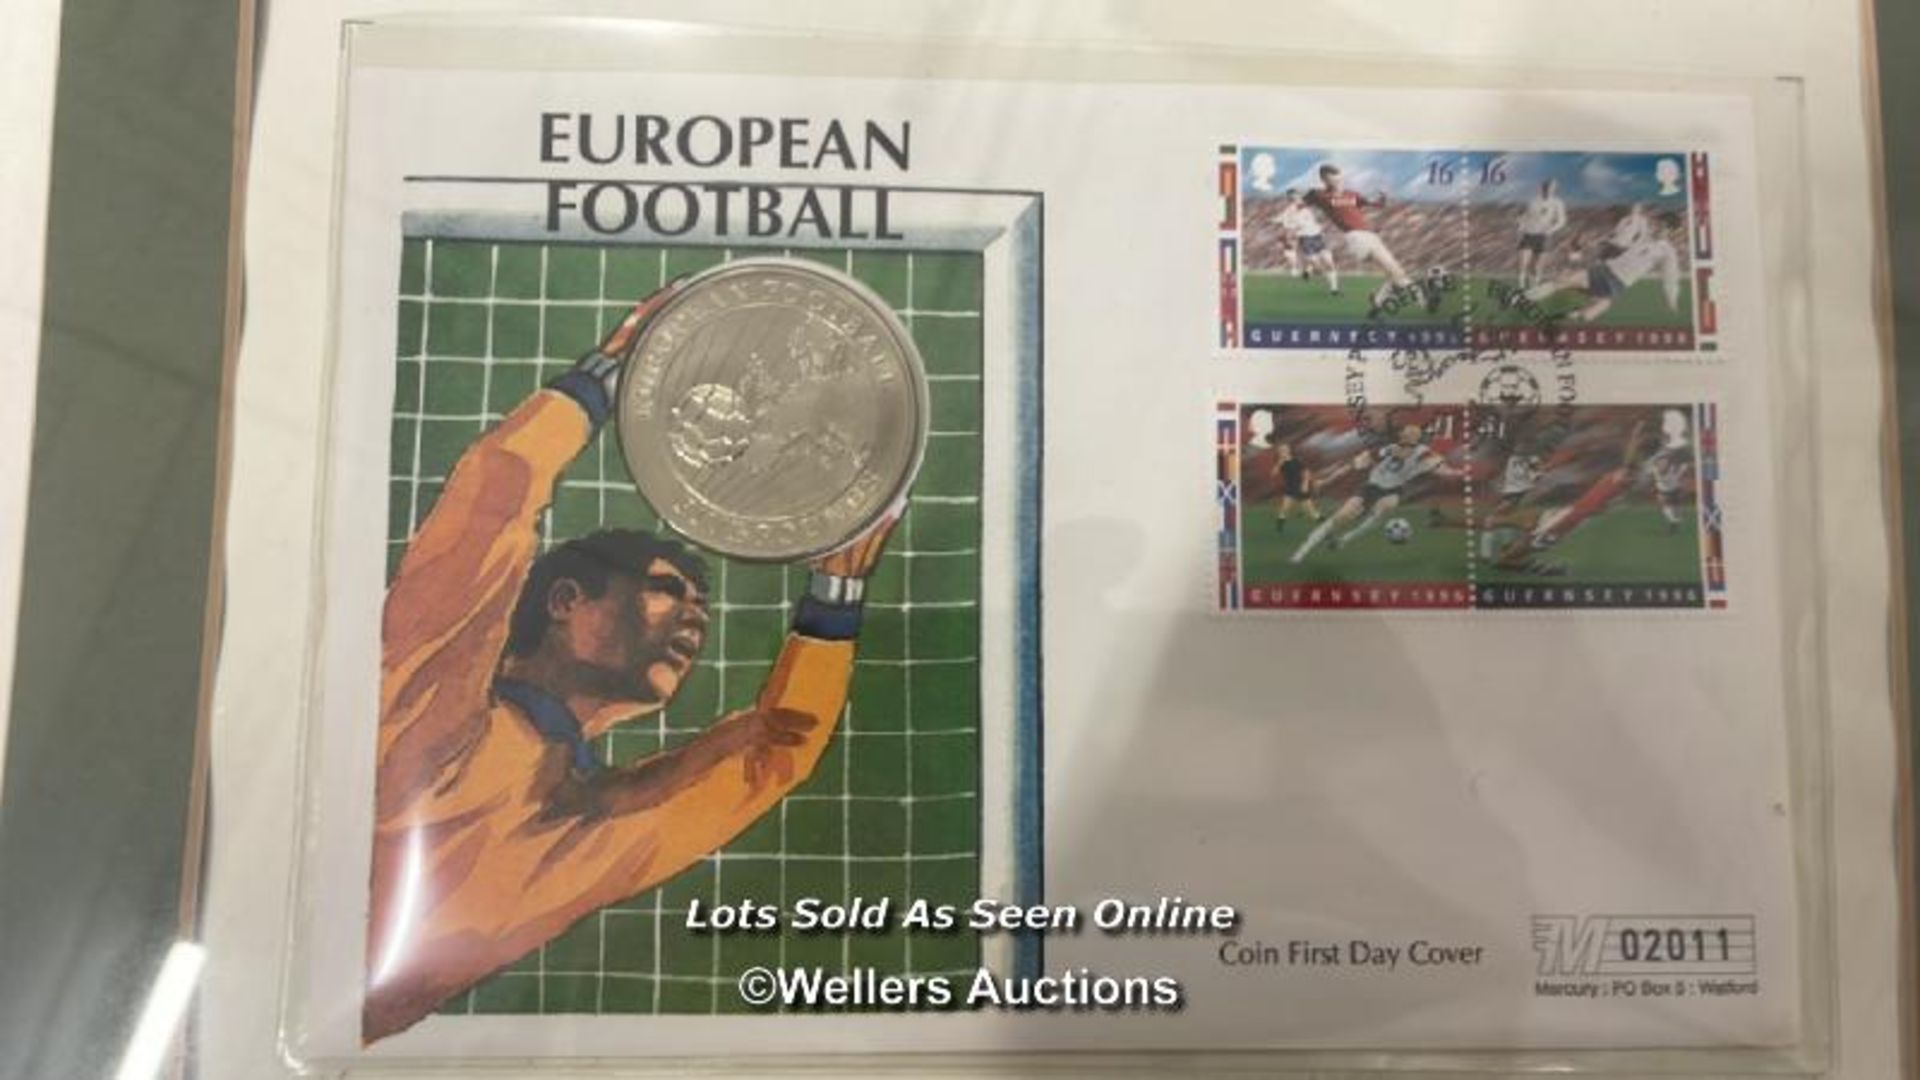 Framed European Football stamp collection 1st day covers with coins - Image 3 of 3